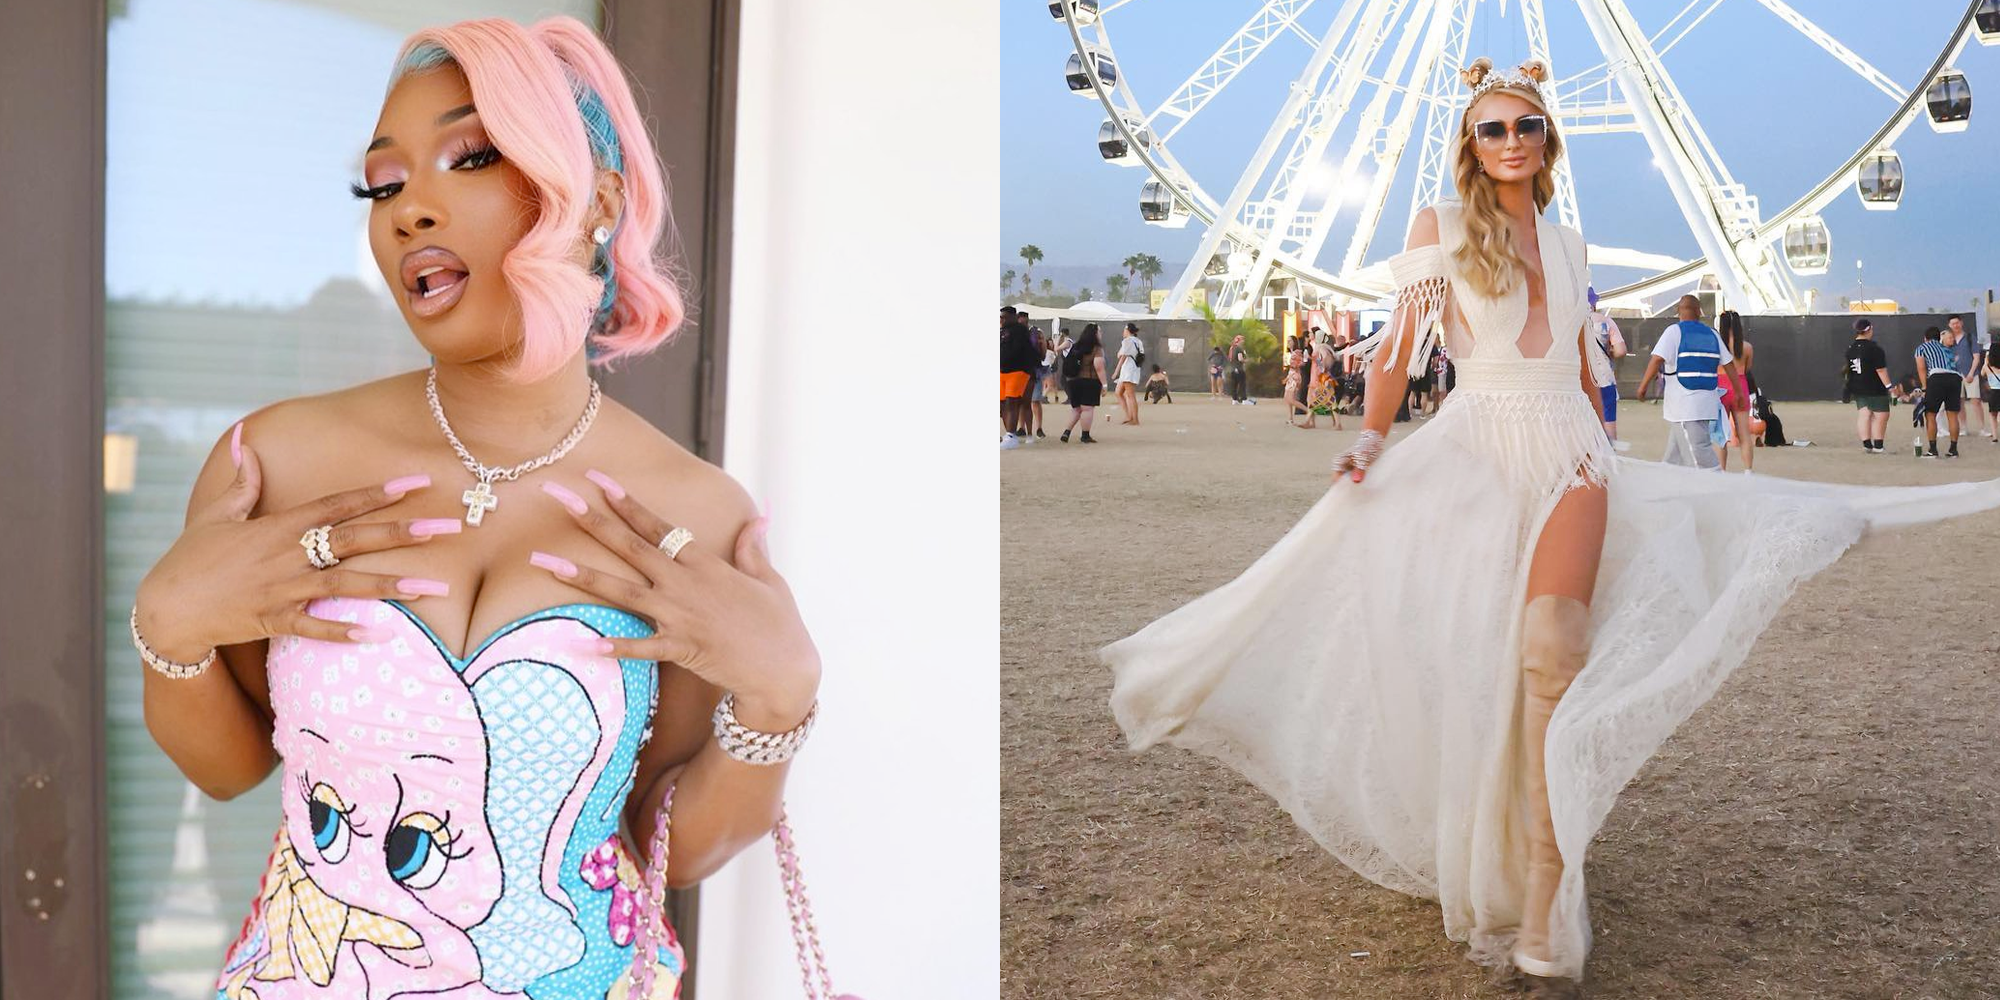 Kendall & Kylie Jenner's Sexiest Coachella Outfits Ever: Photos